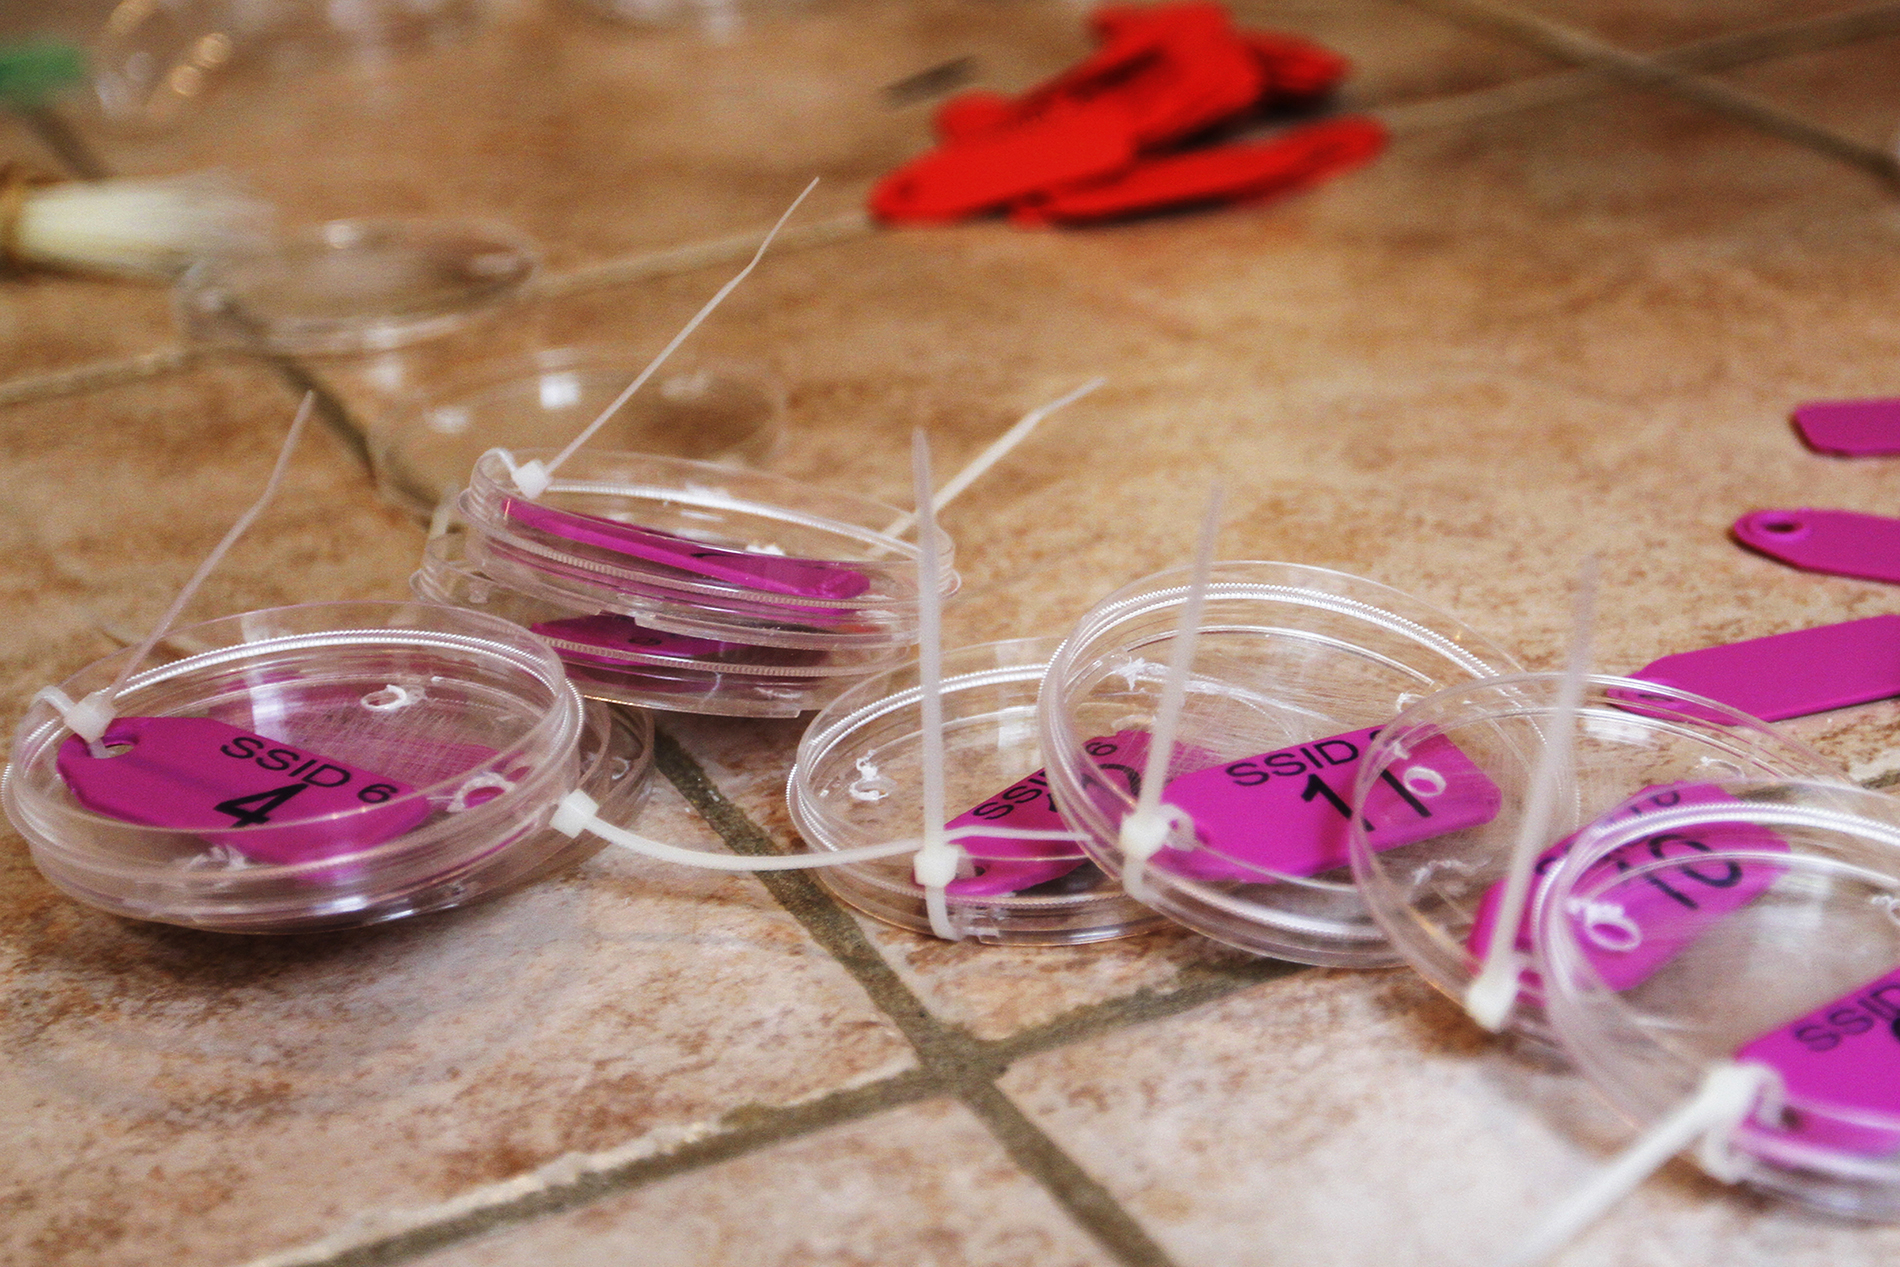 pink, labeled ID tags in plastic discs with zip ties sit piles on a tile floor